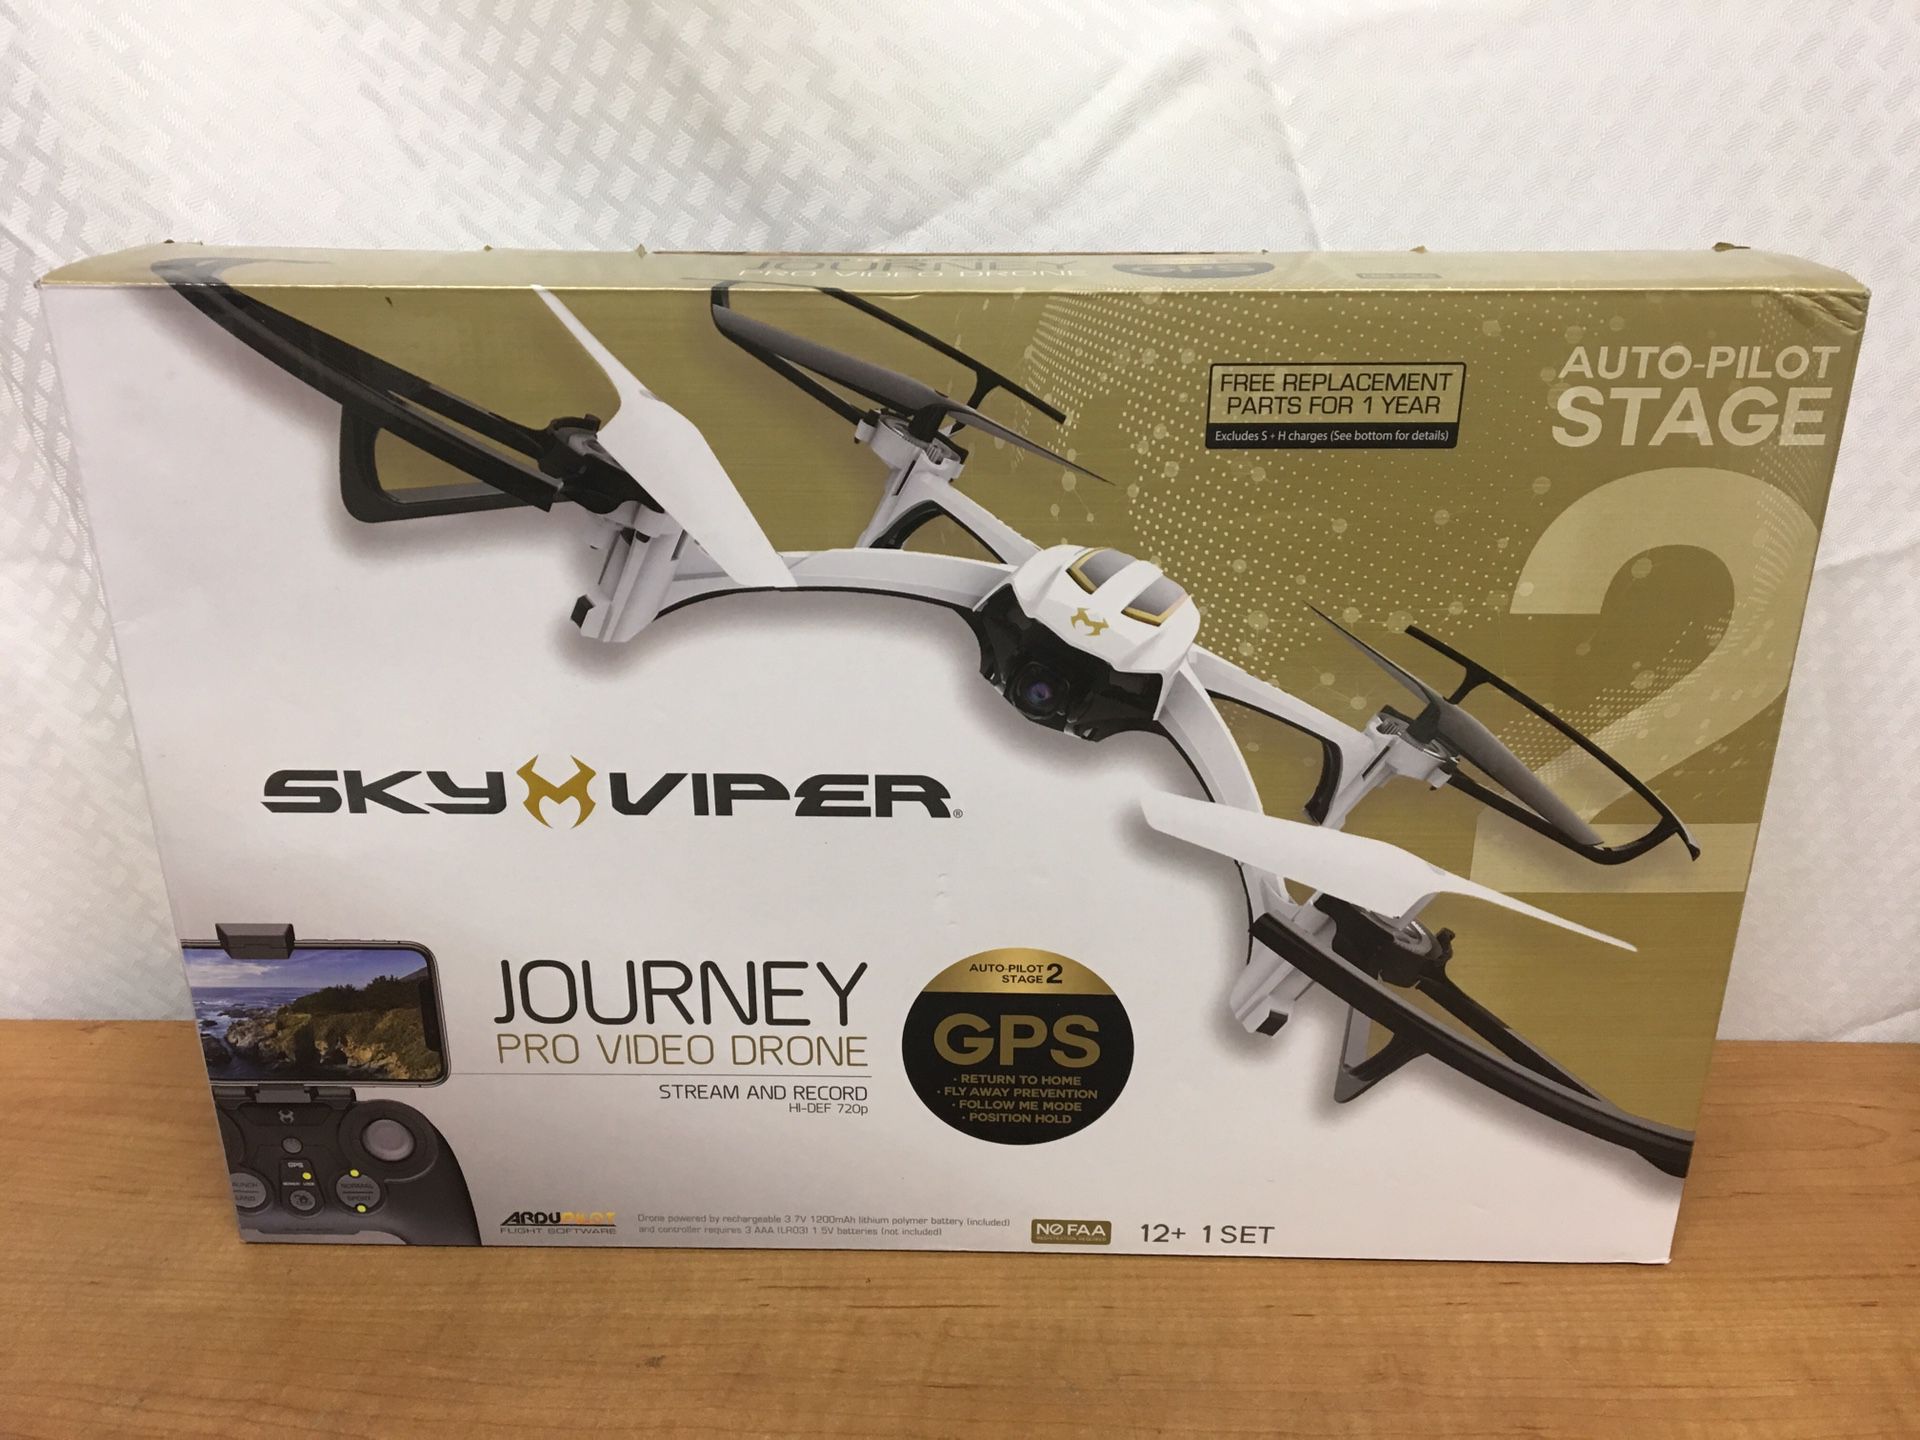 Sky Viper 1849 Journey GPS Steaming Video Drone